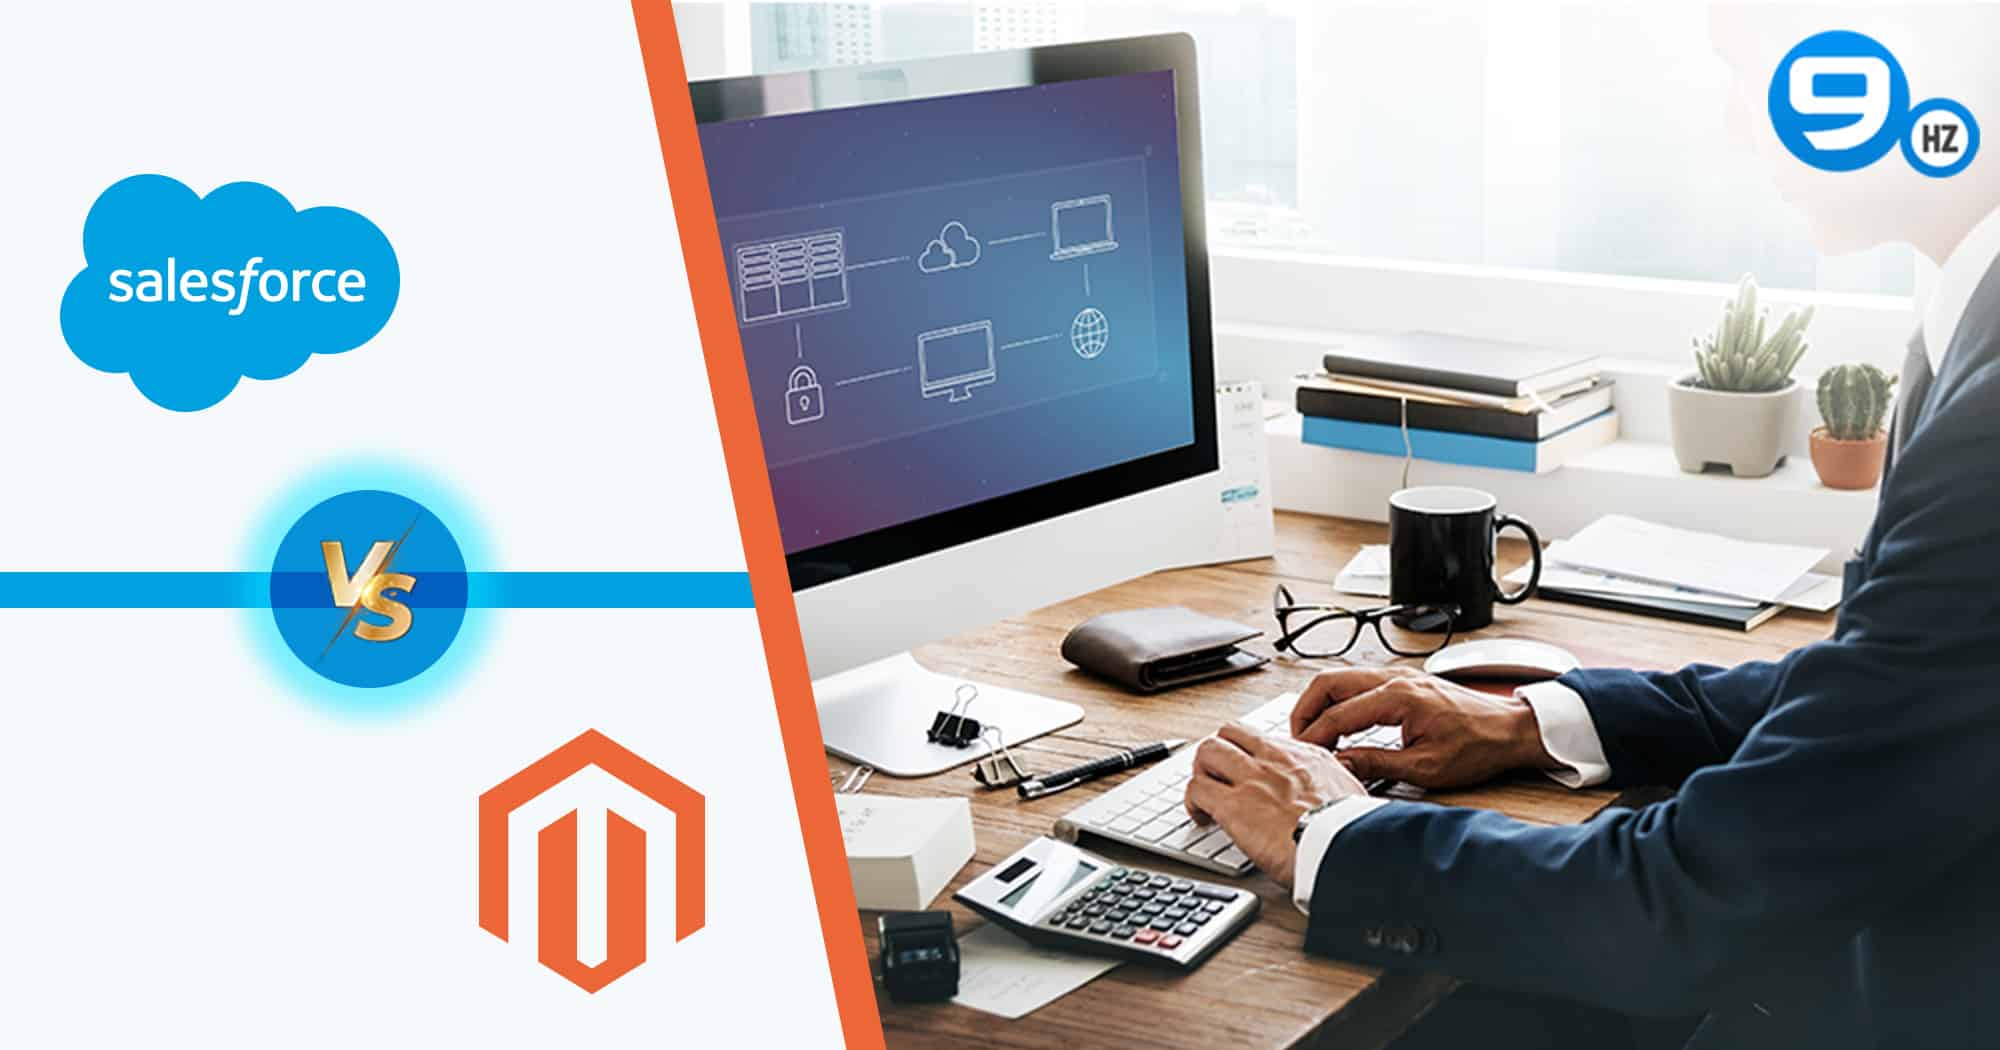 Salesforce Vs Magento Commerce Cloud: Difference Between Salesforce and Magento?